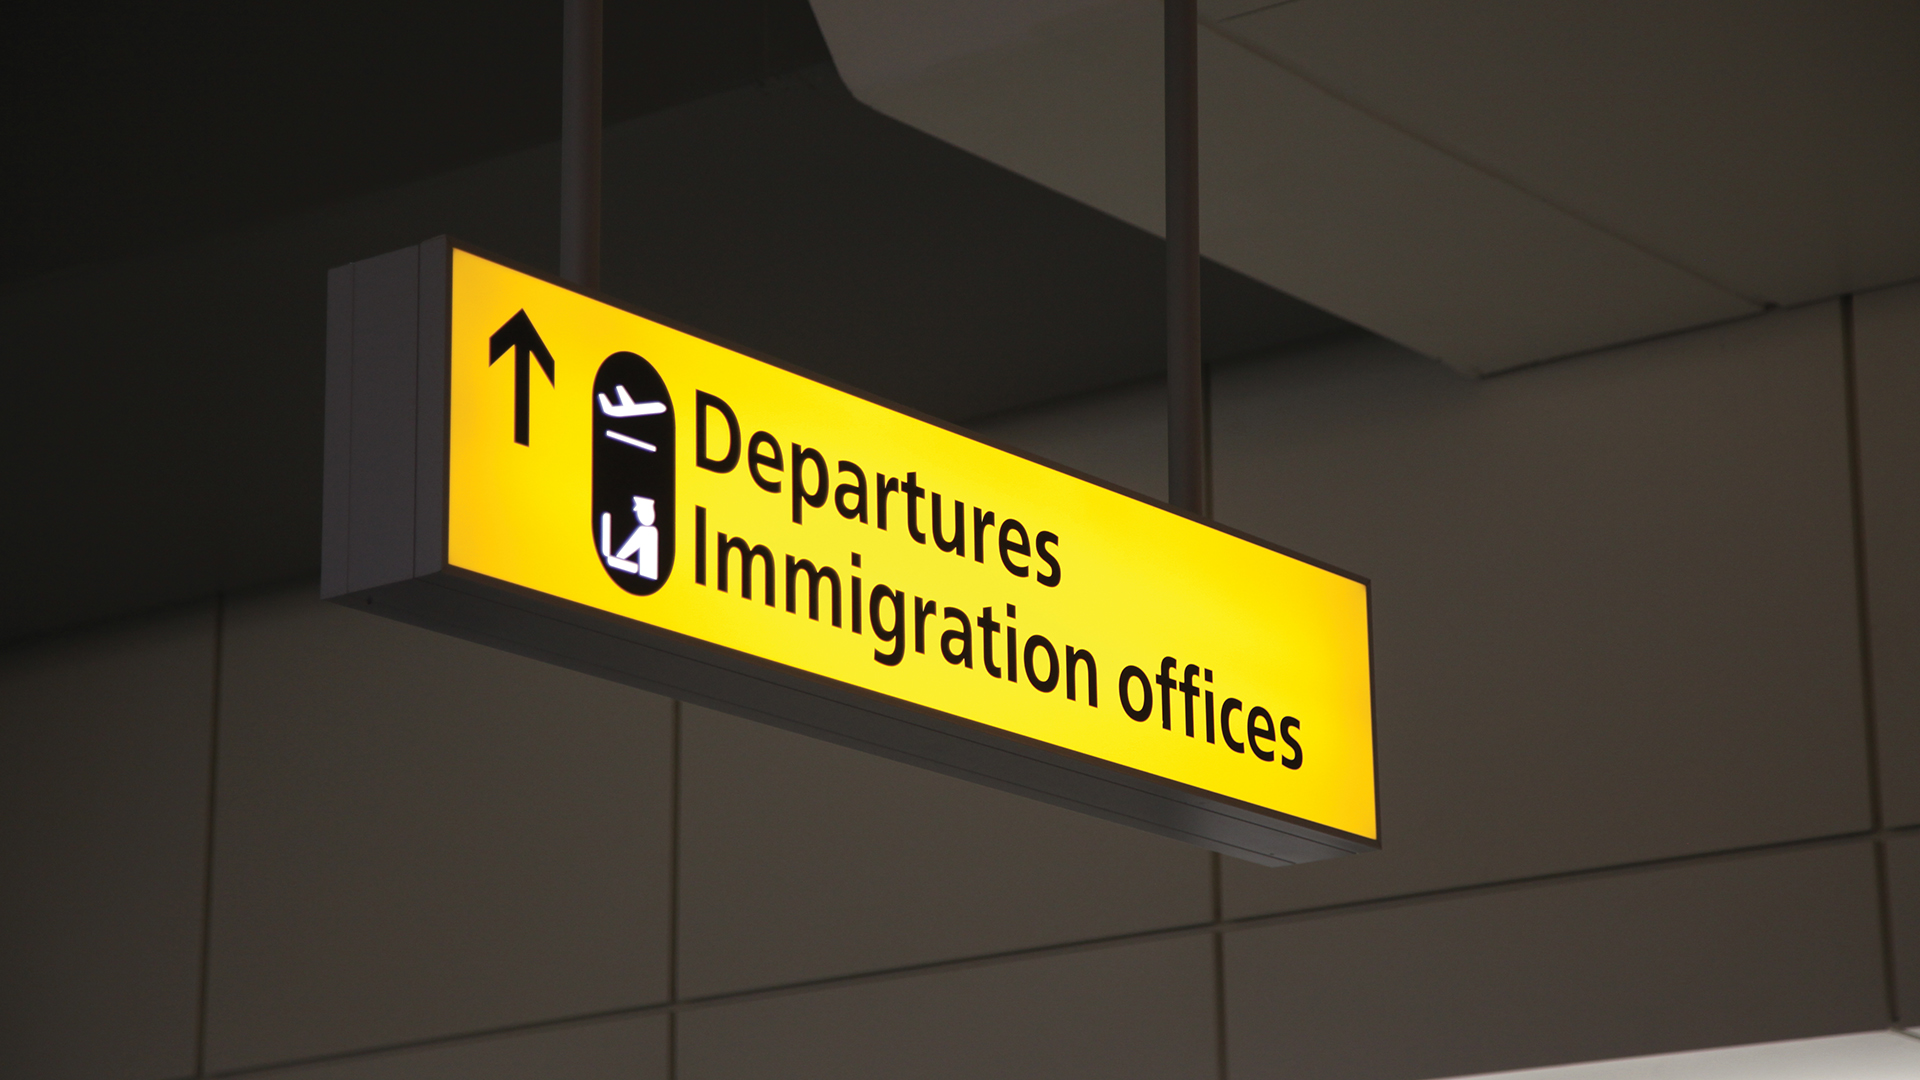 NHS ethics are being compromised by hostile immigration policies